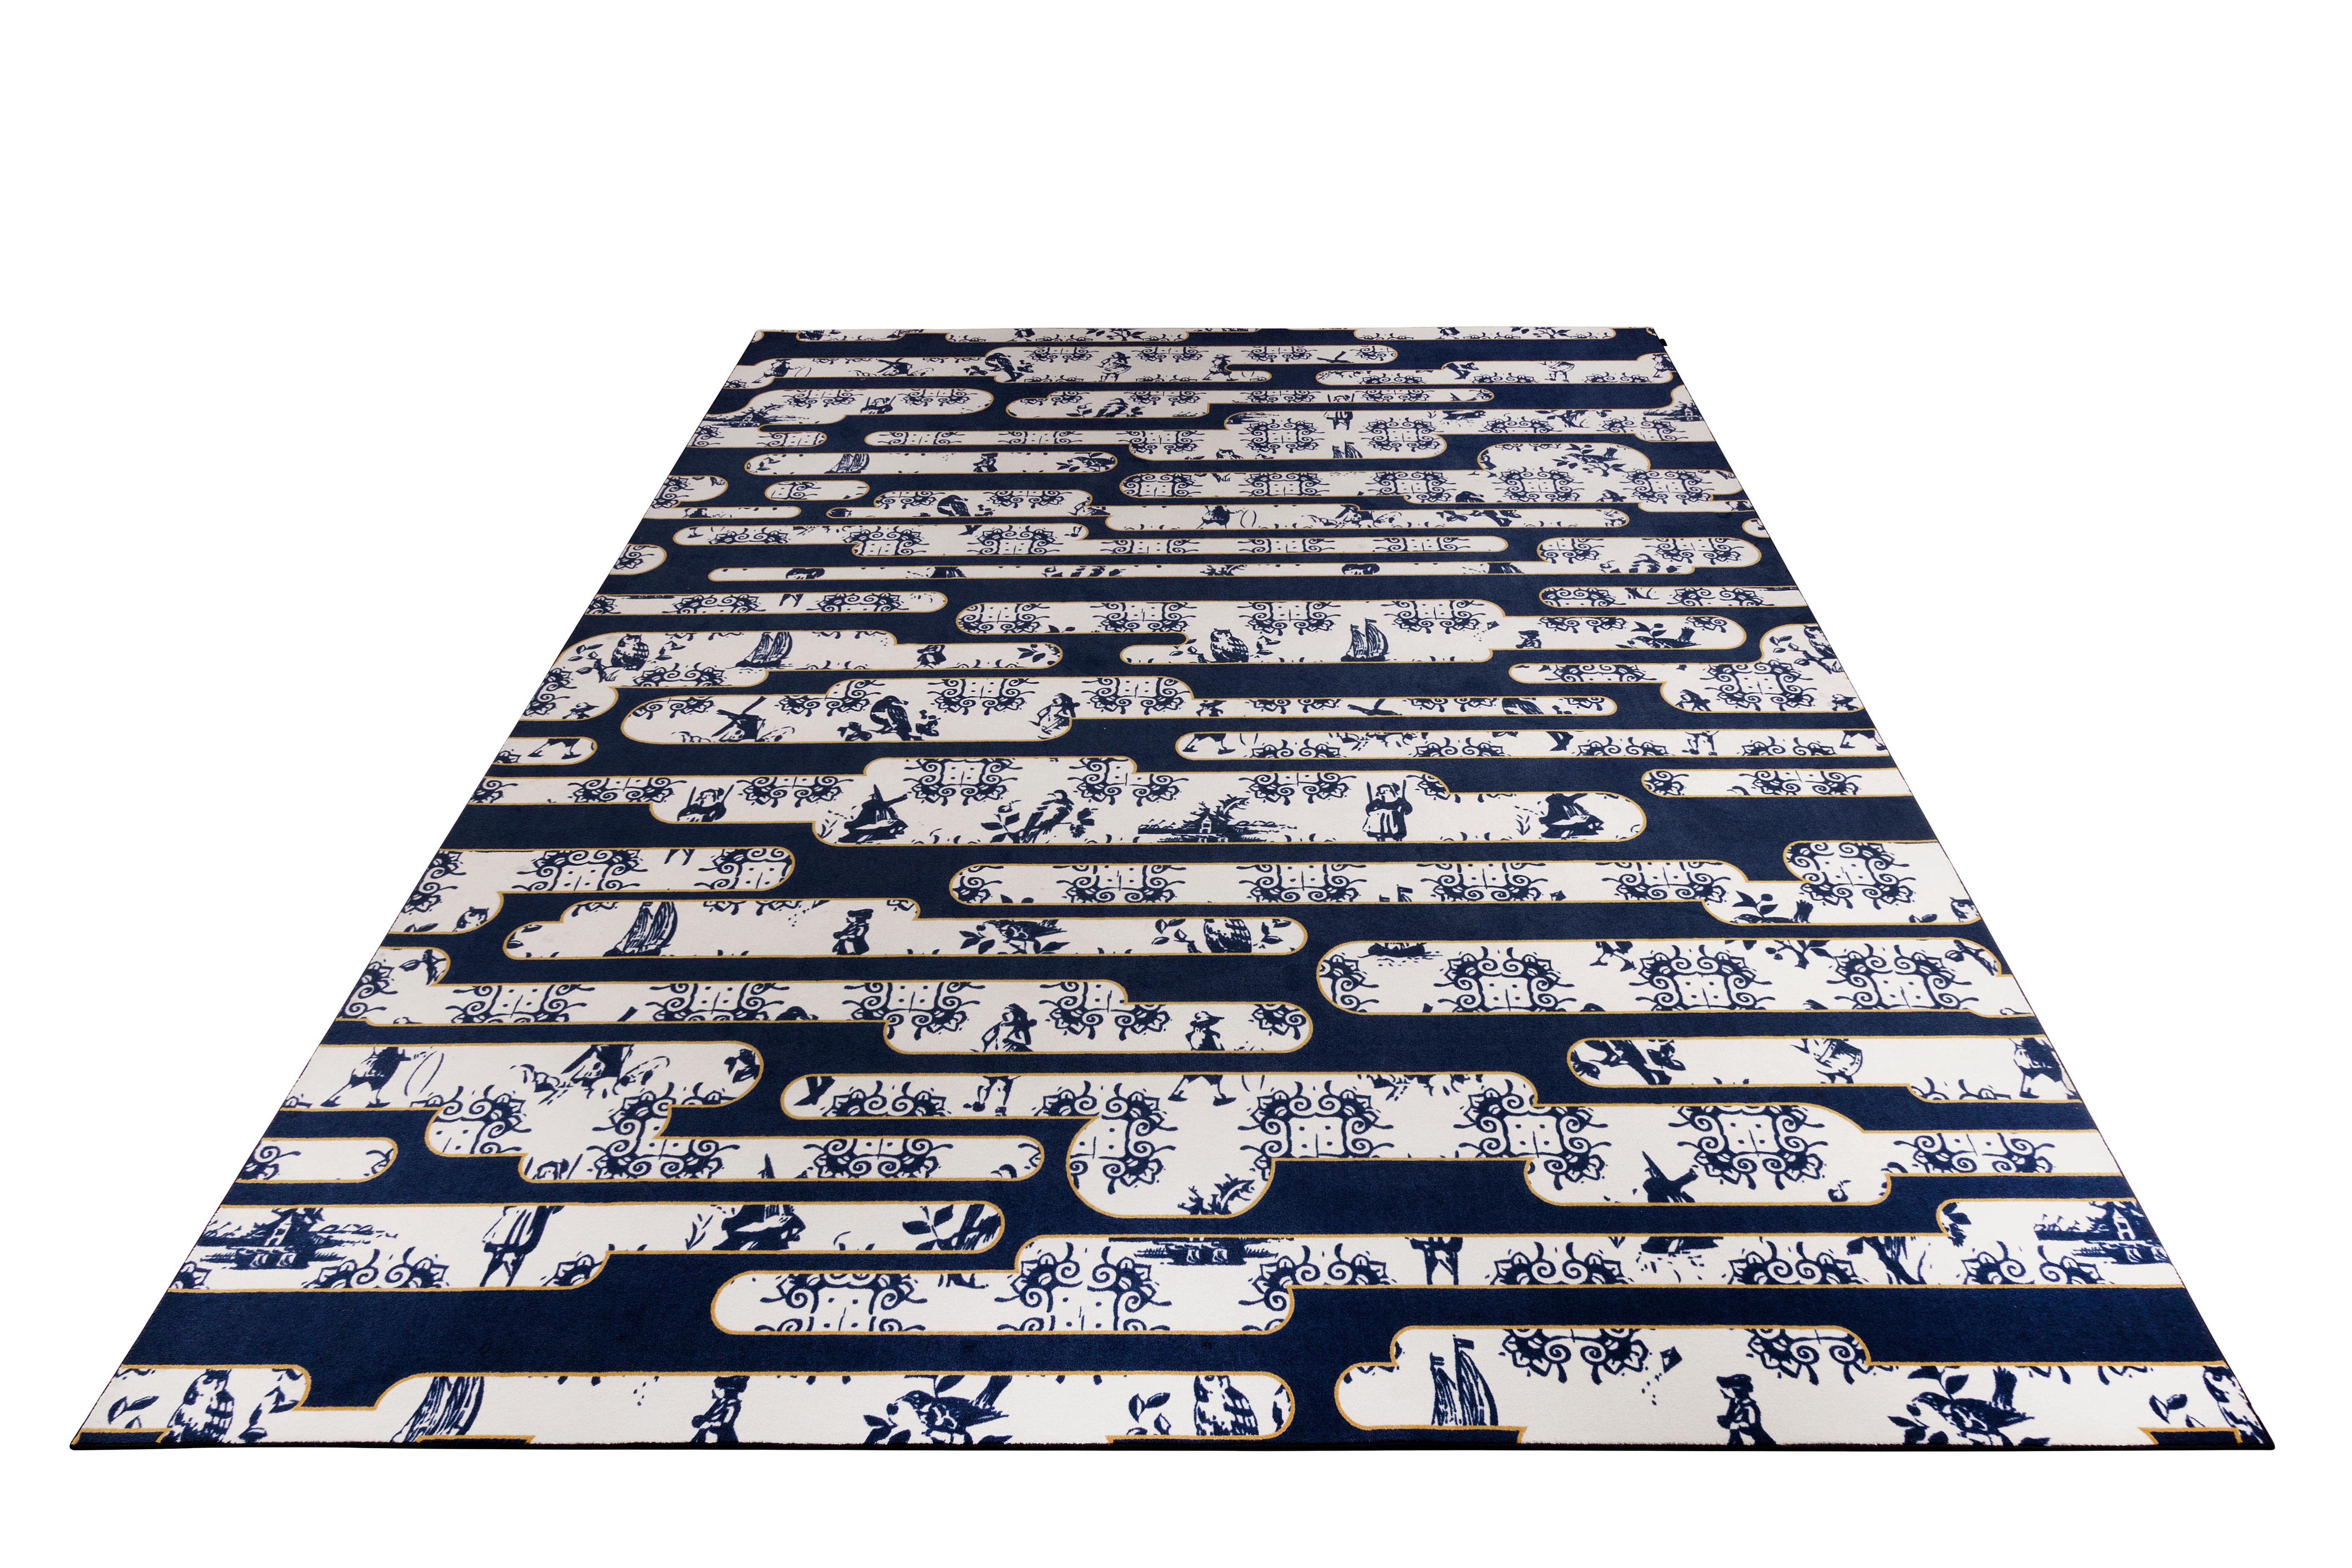 Moooi Dutch sky blue Rug in wool by Edward van Vliet.

After his graduation from the Design Academy Eindhoven in 1989 – Edward belongs to the famous generation of Dutch designers who have been causing international sensation for many years now -